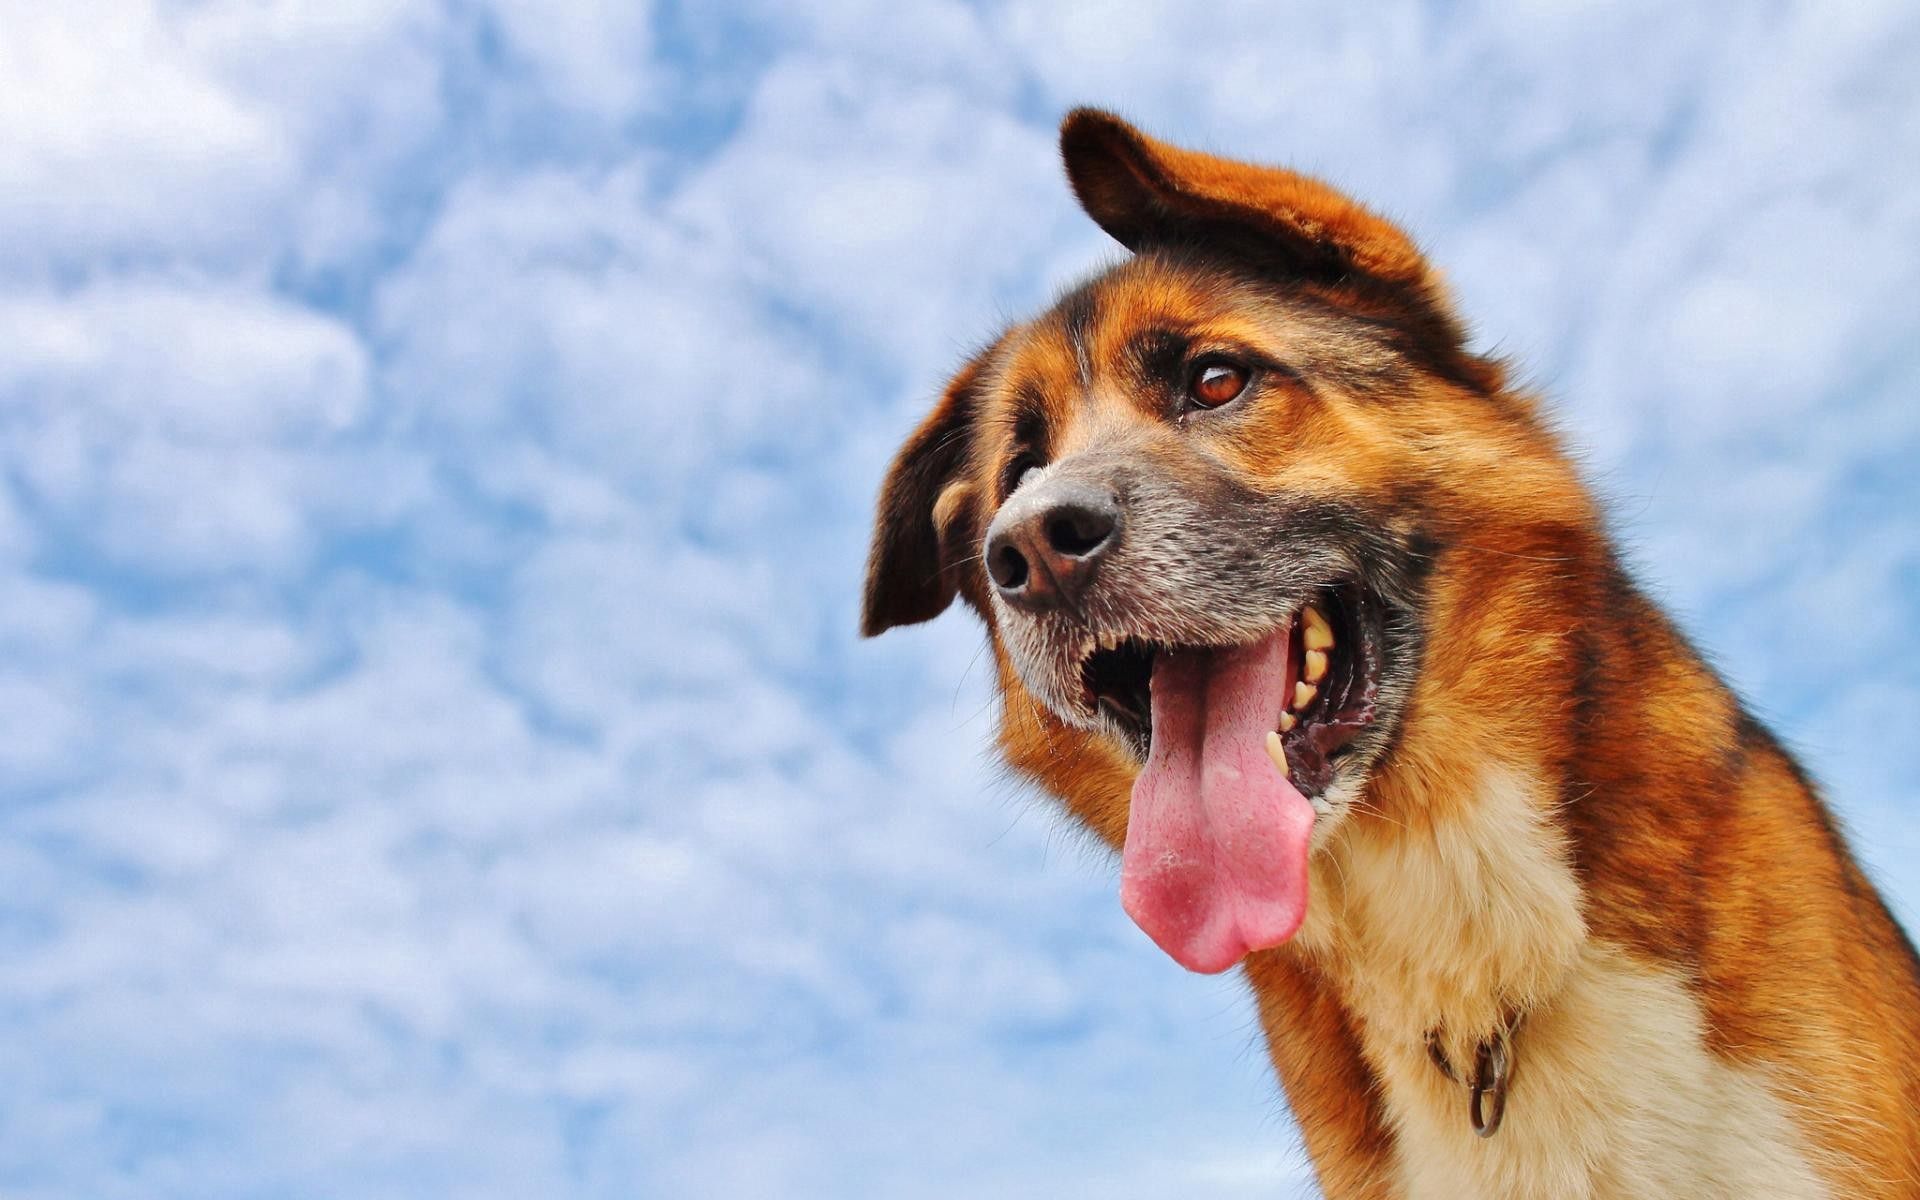 animals, sky, clouds, dog, muzzle, protruding tongue, tongue stuck out